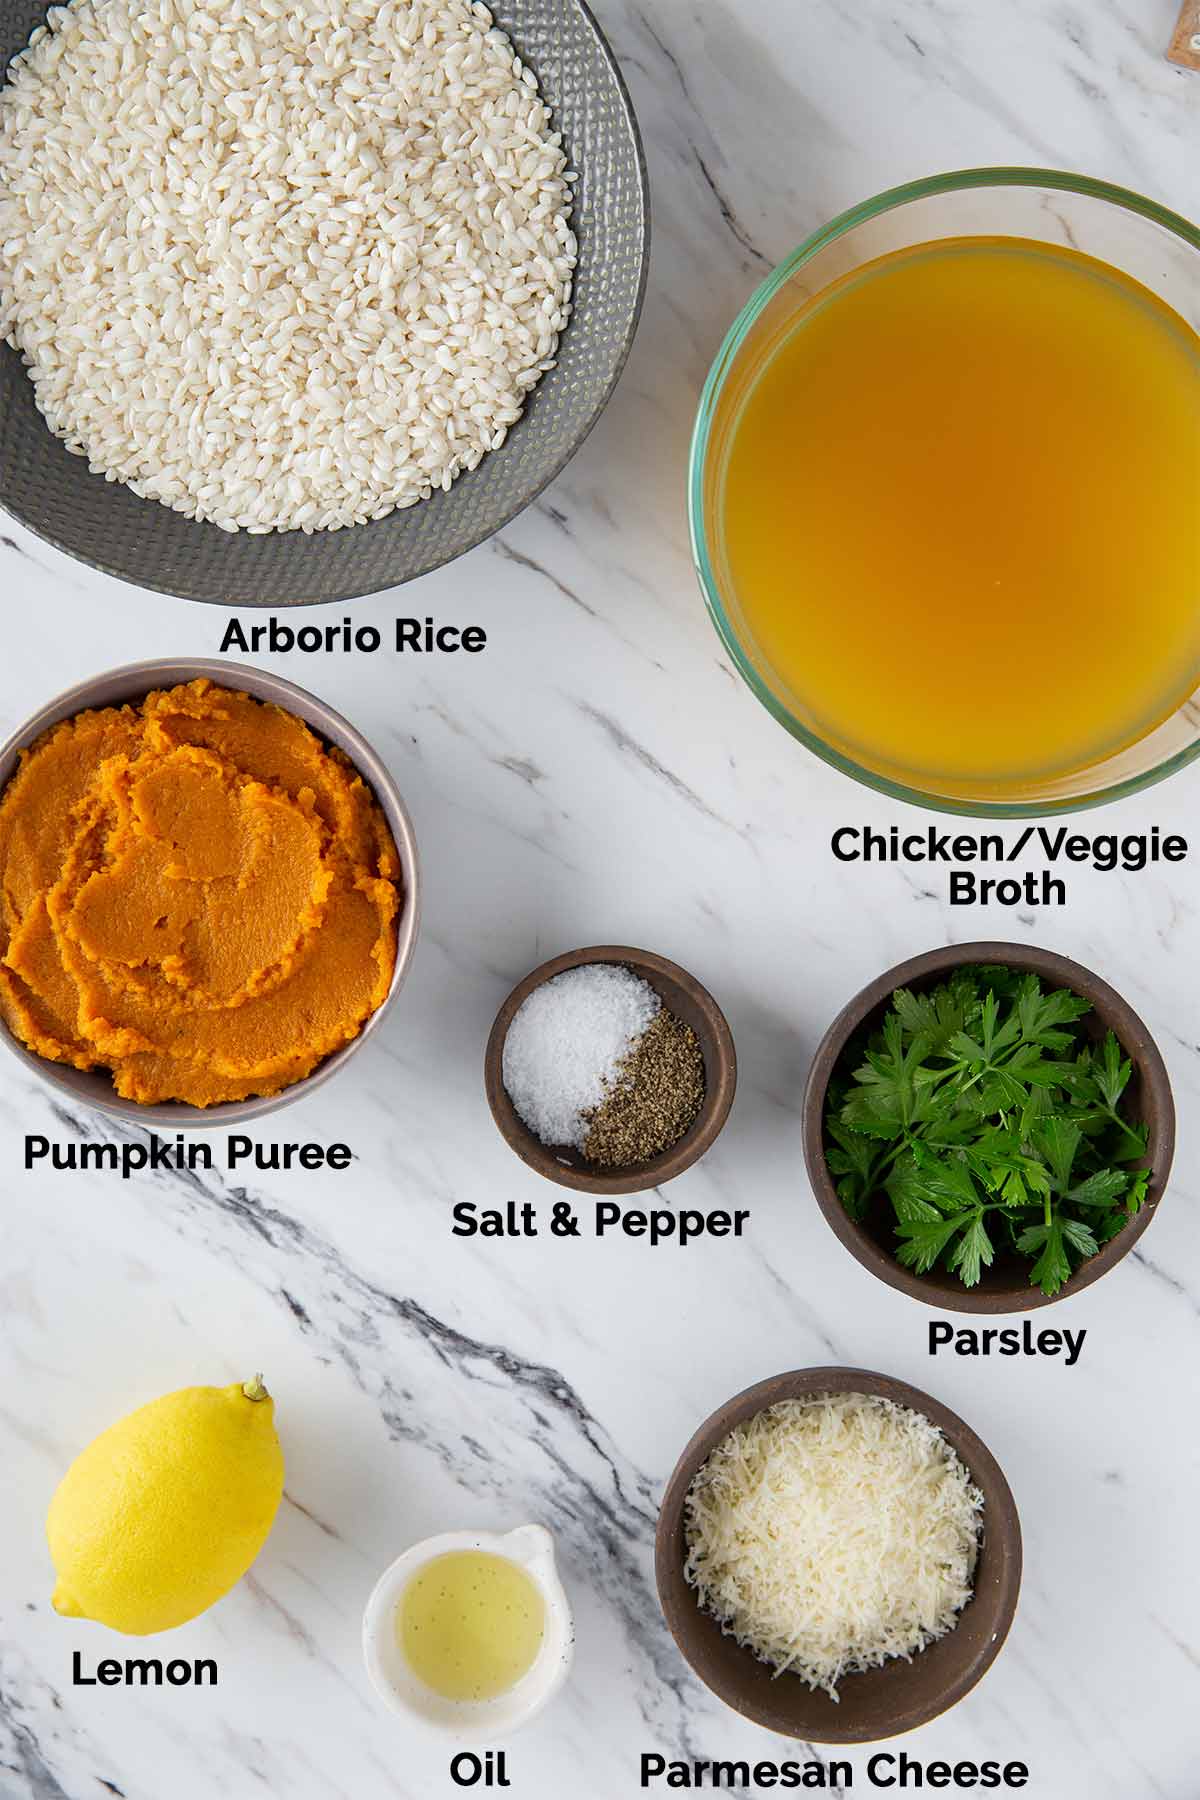 Arborio rice, pumpkin puree, broth, parsley, oil, parmesan cheese, lemon, and seasonings laid on a flat surface for making Instant Pot pumpkin risotto.